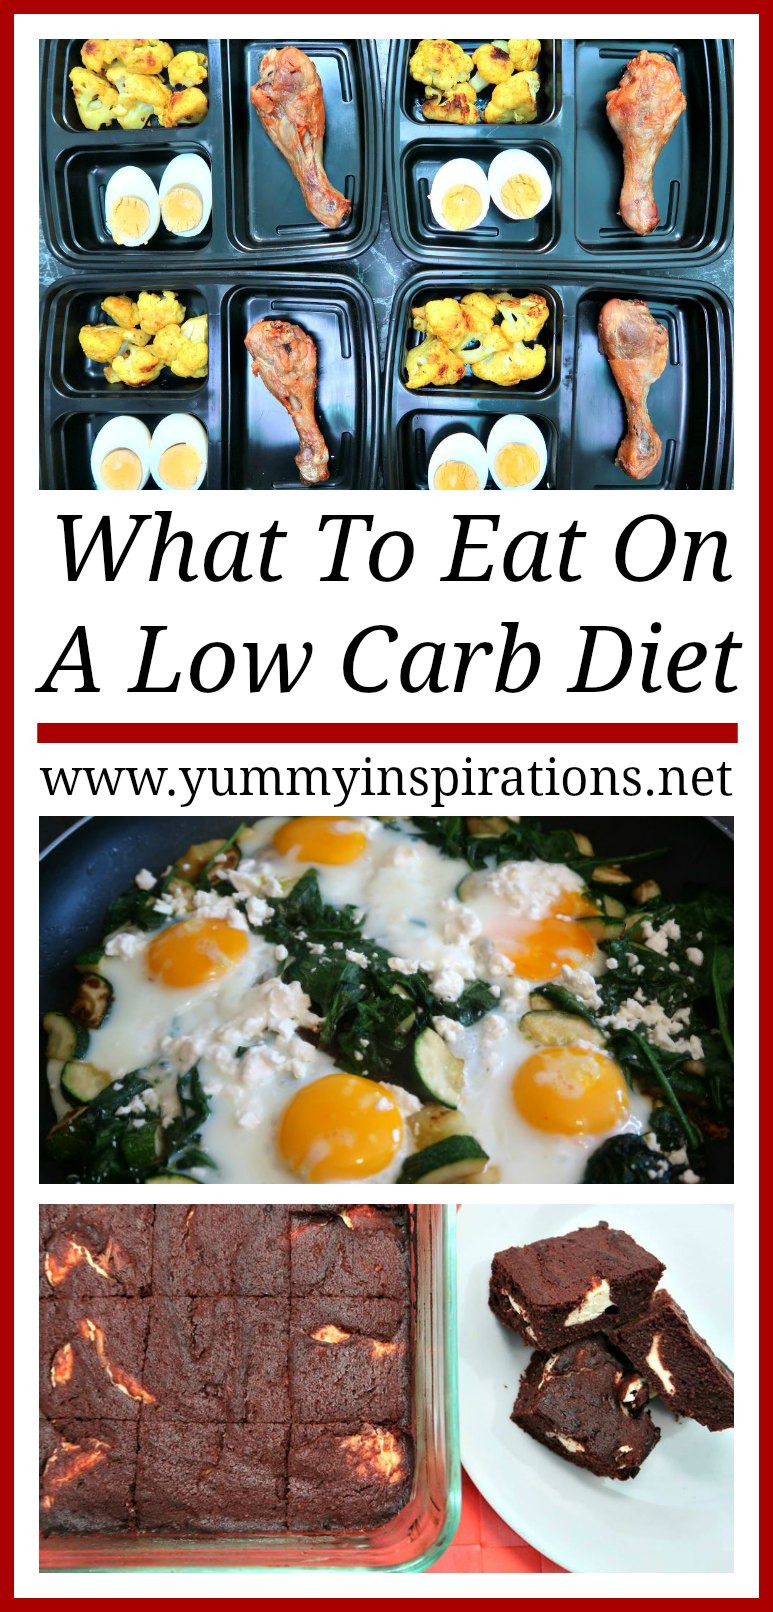 Low Carb Diet Ideas
 What To Eat A Low Carb Diet Ideas For Meals & What To